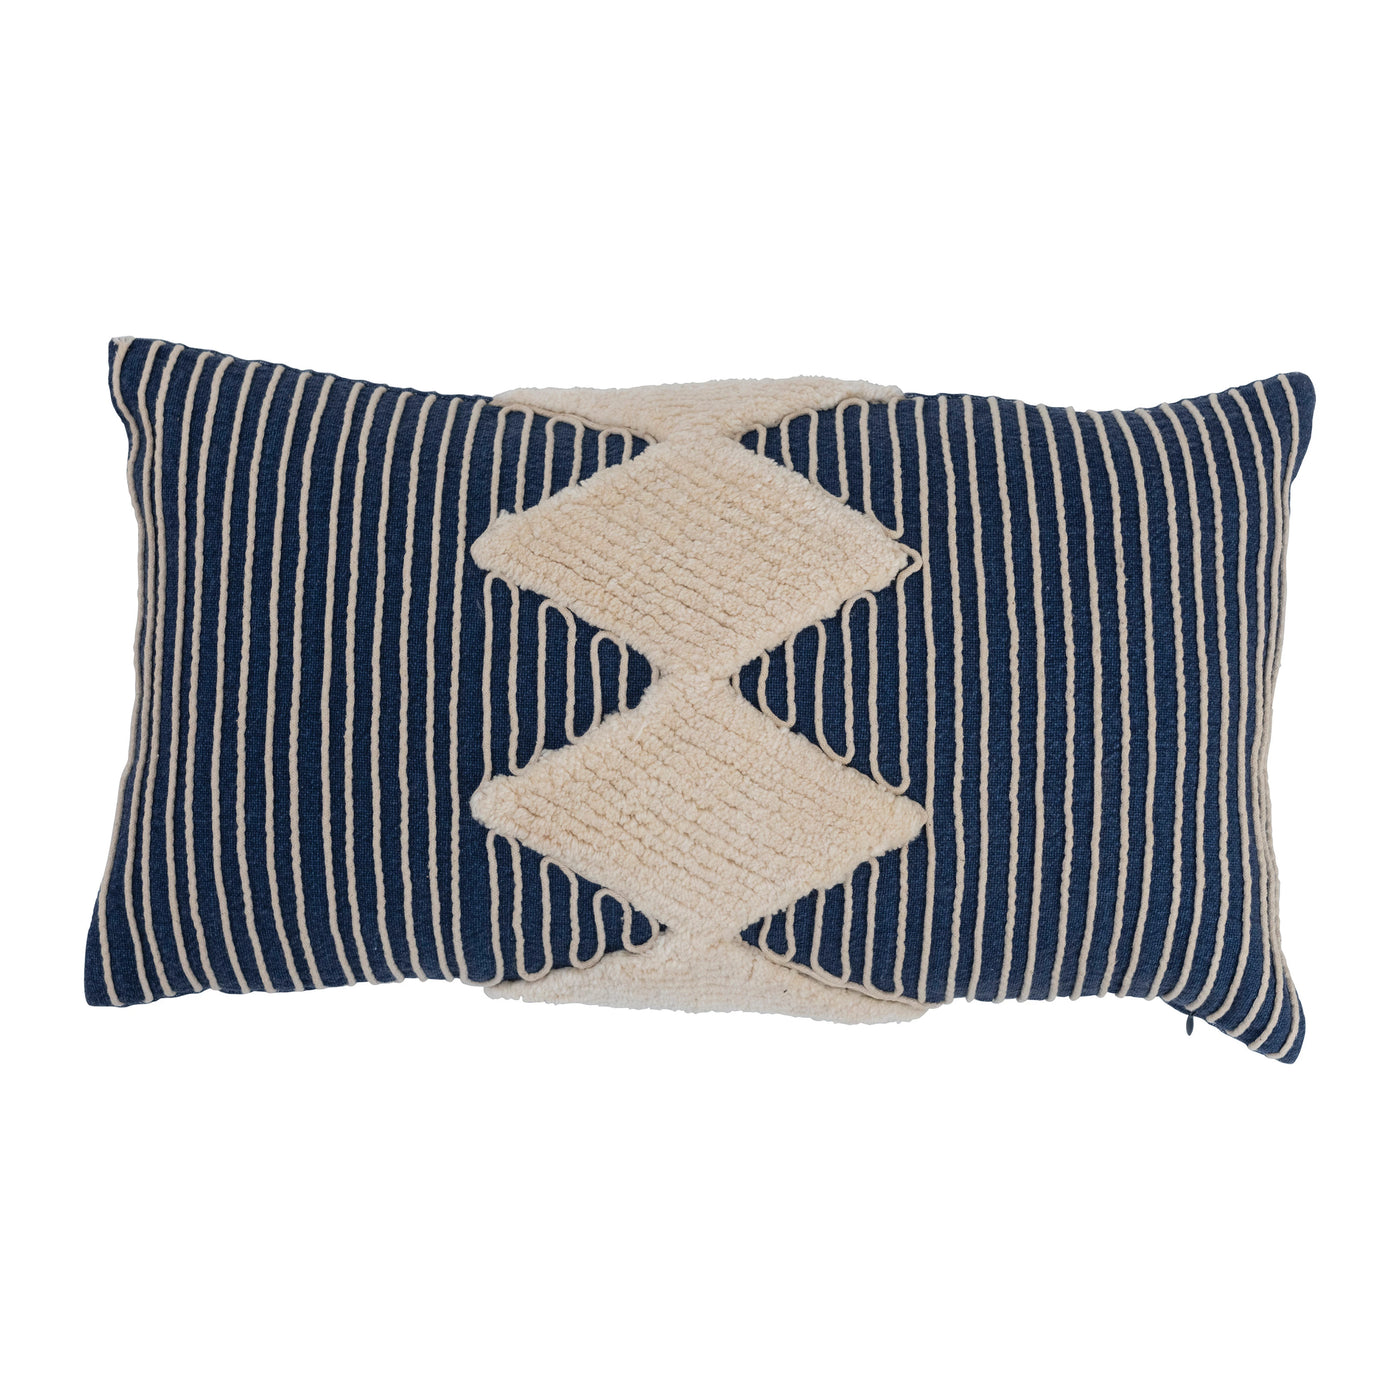 Navy and White Striped Pillow